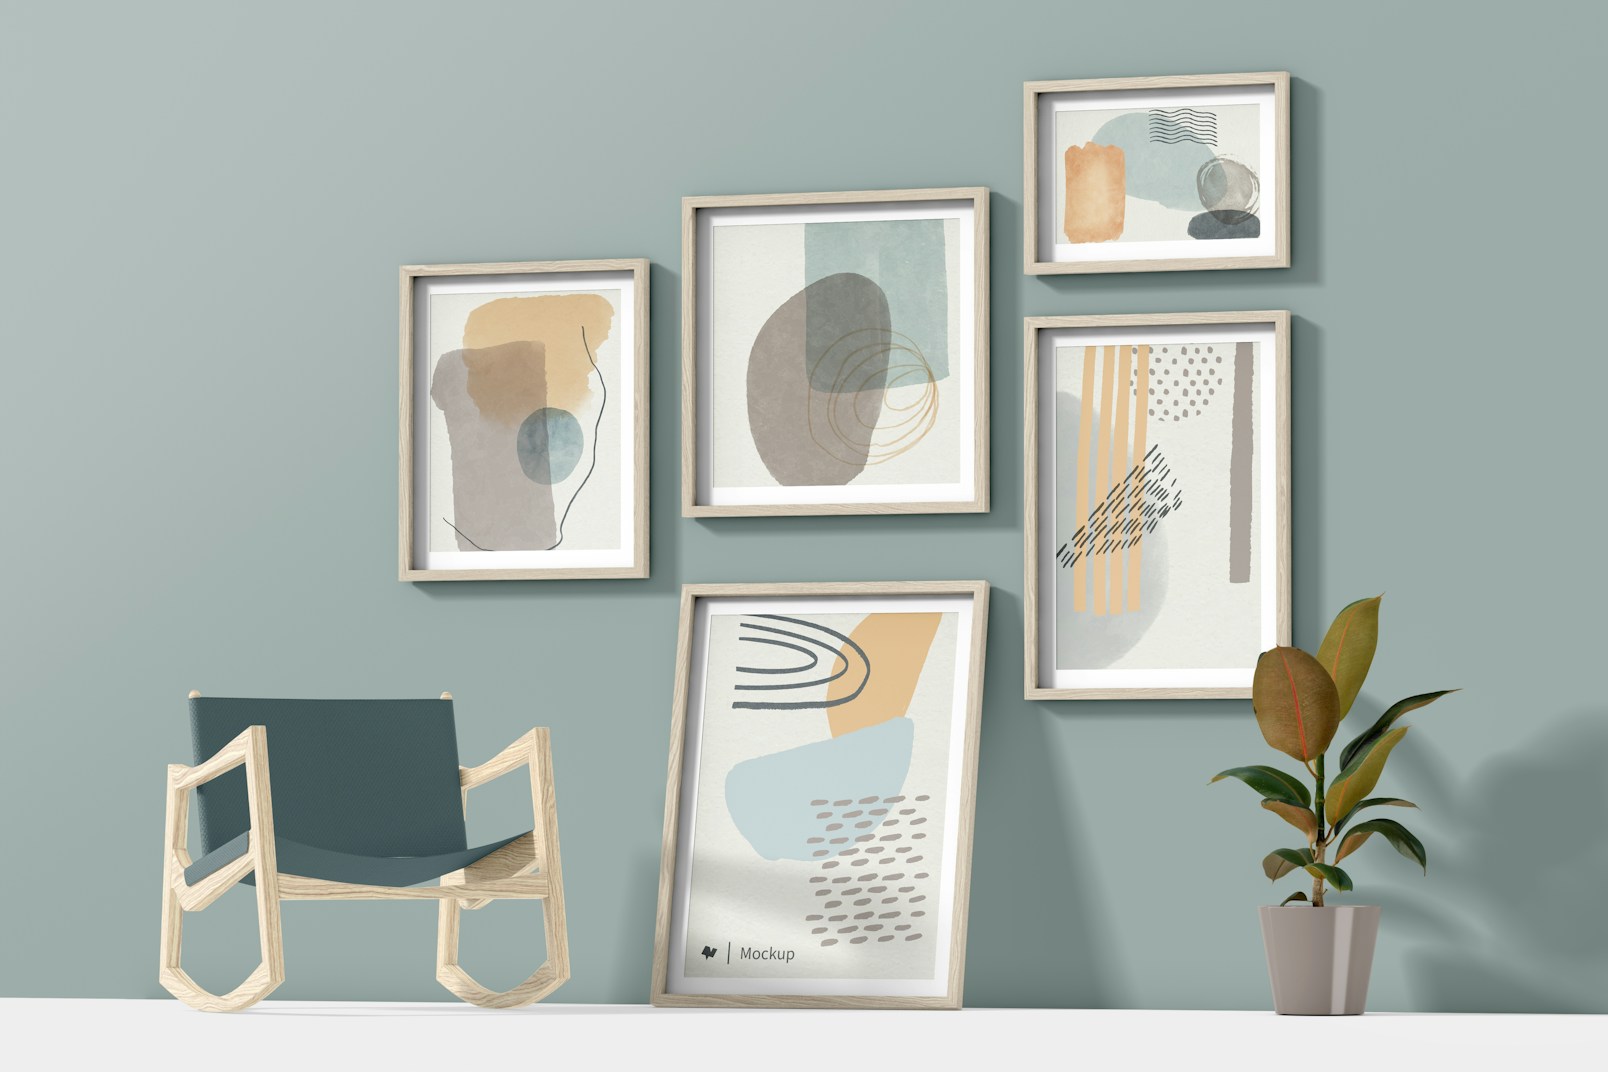 Gallery Frames with Rocking Chair Mockup